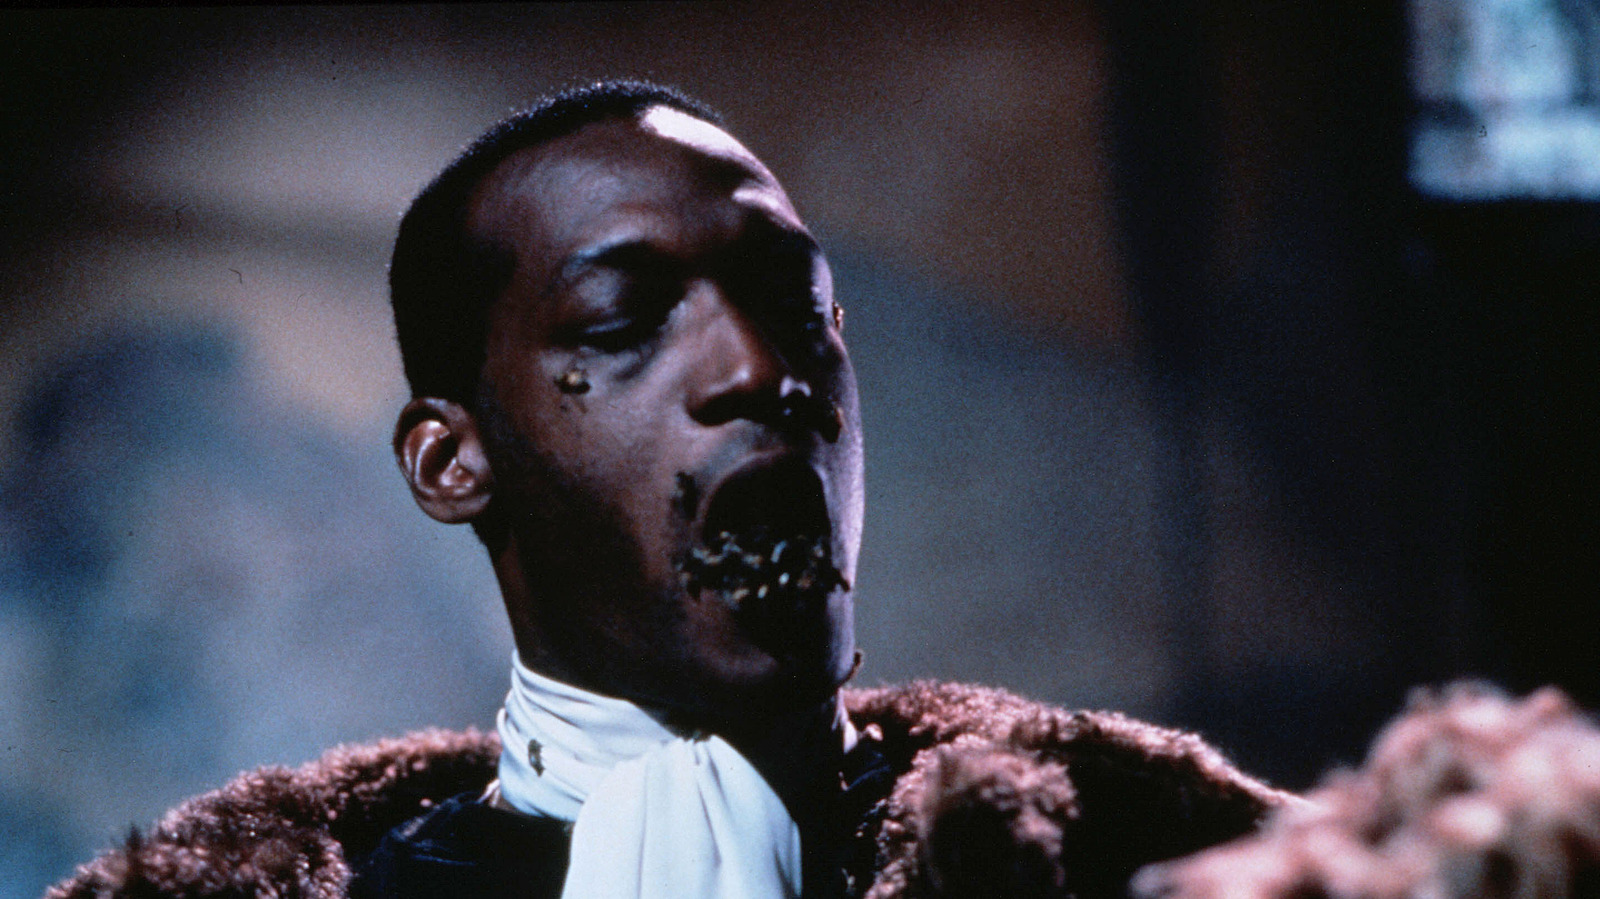 Tony Todd Gave Candyman His Soul in the Horror Movie Franchise